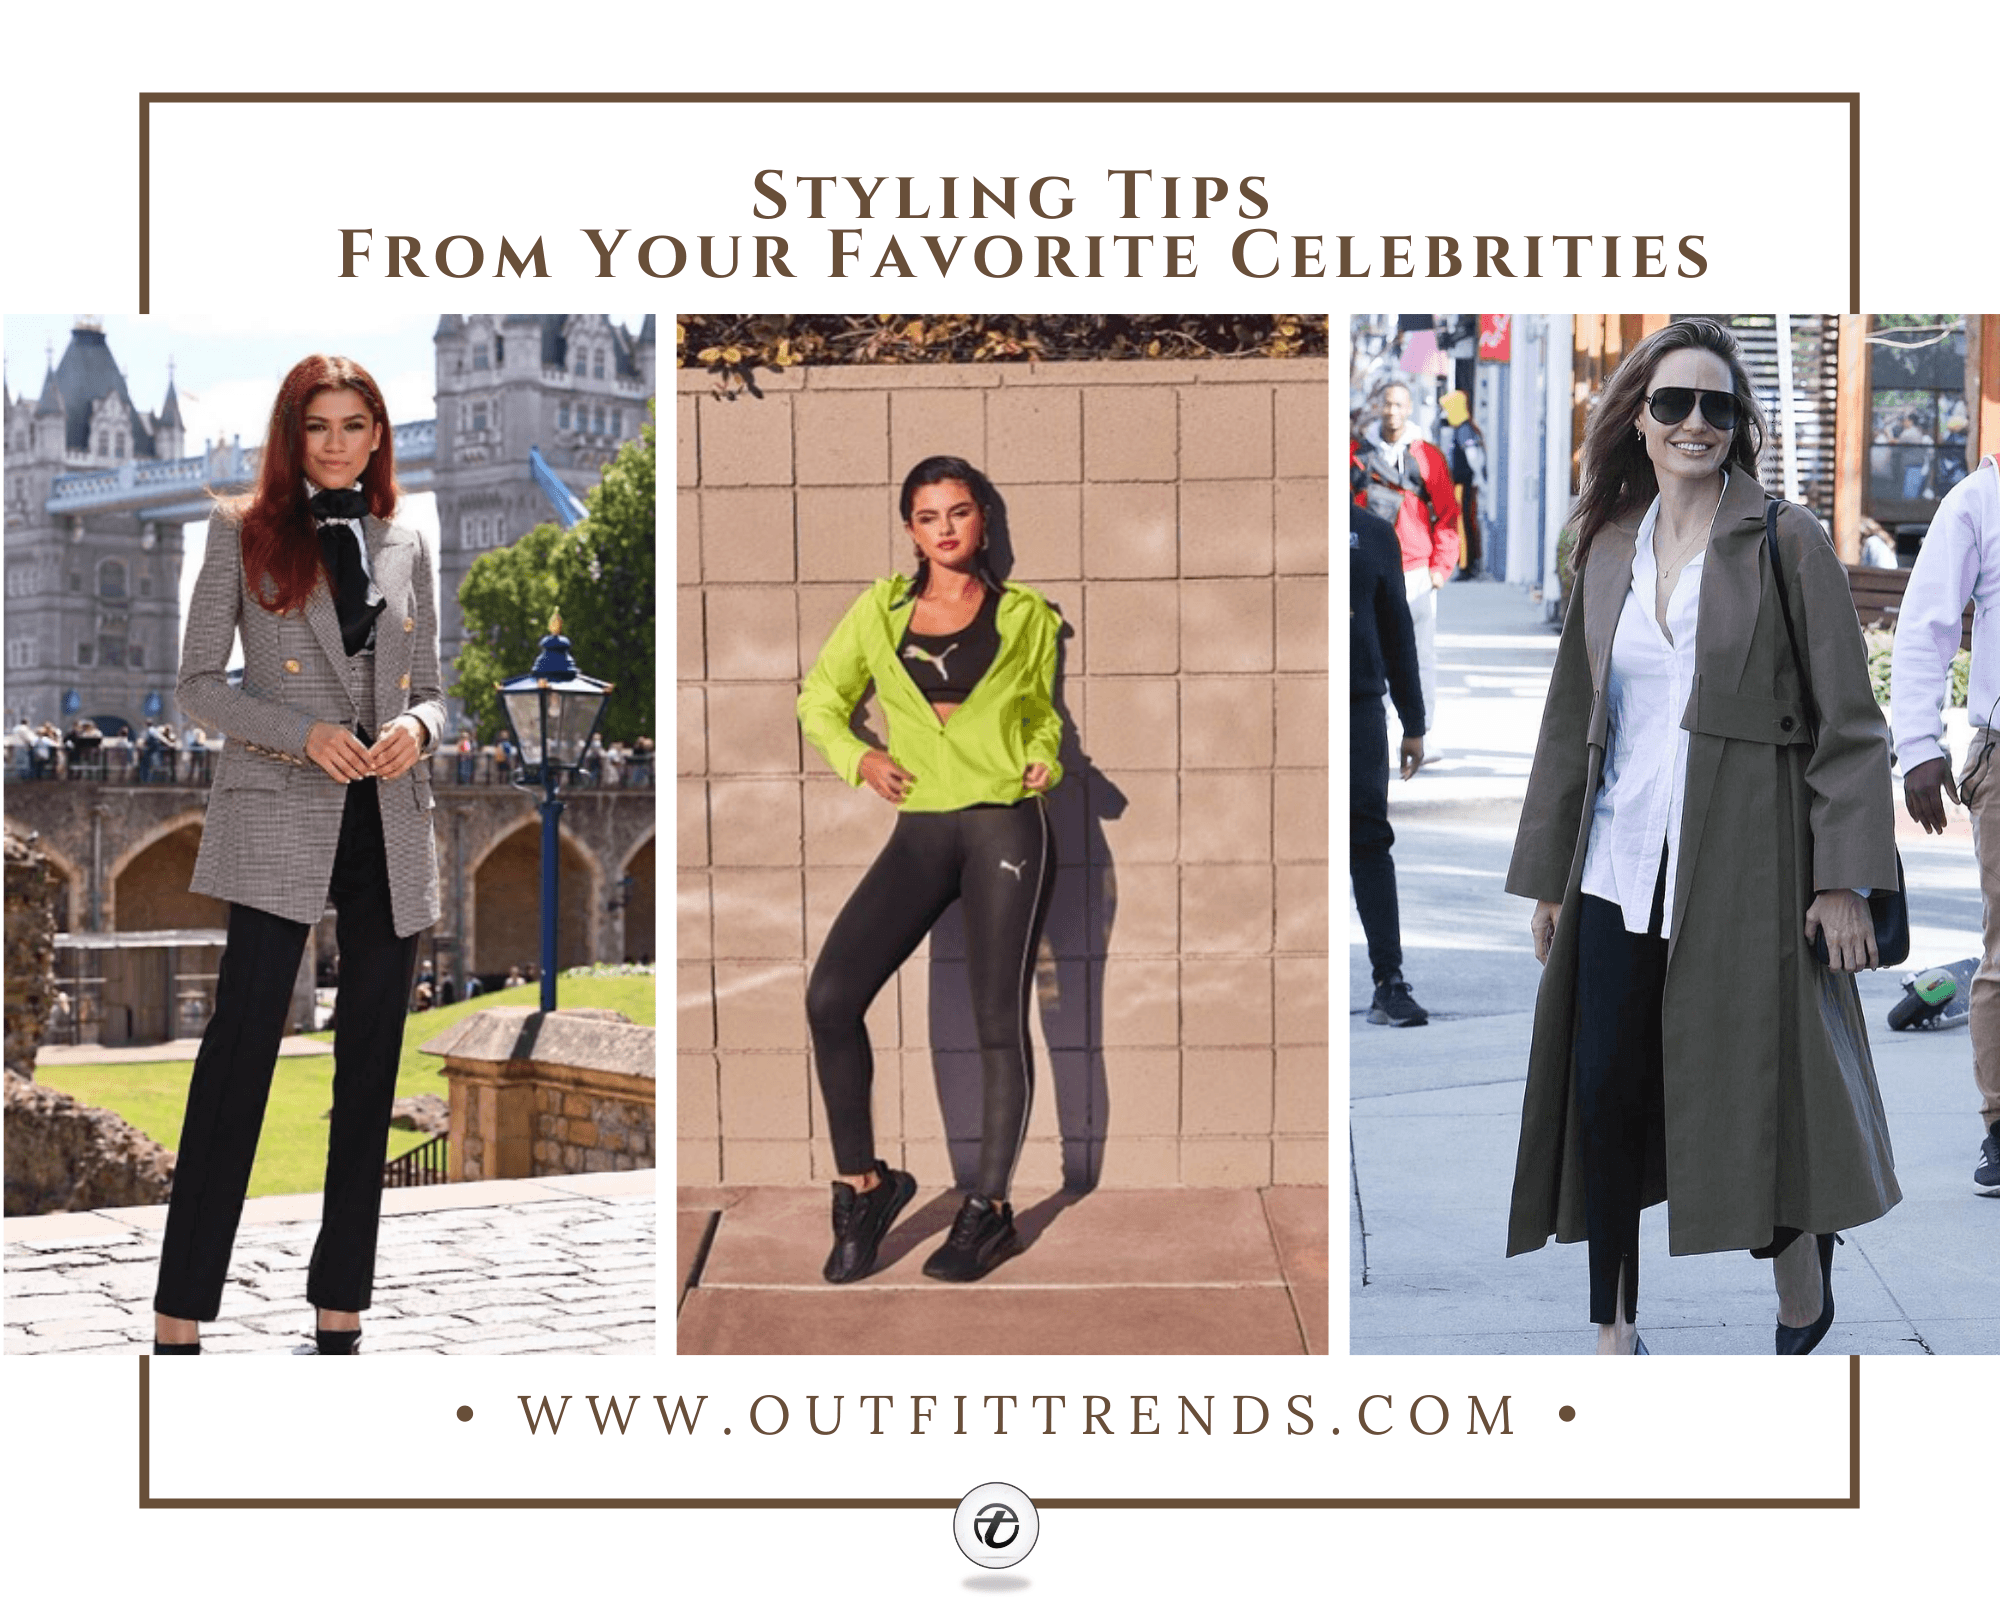 Pin on Celebrity Styles  How to dress like the stars